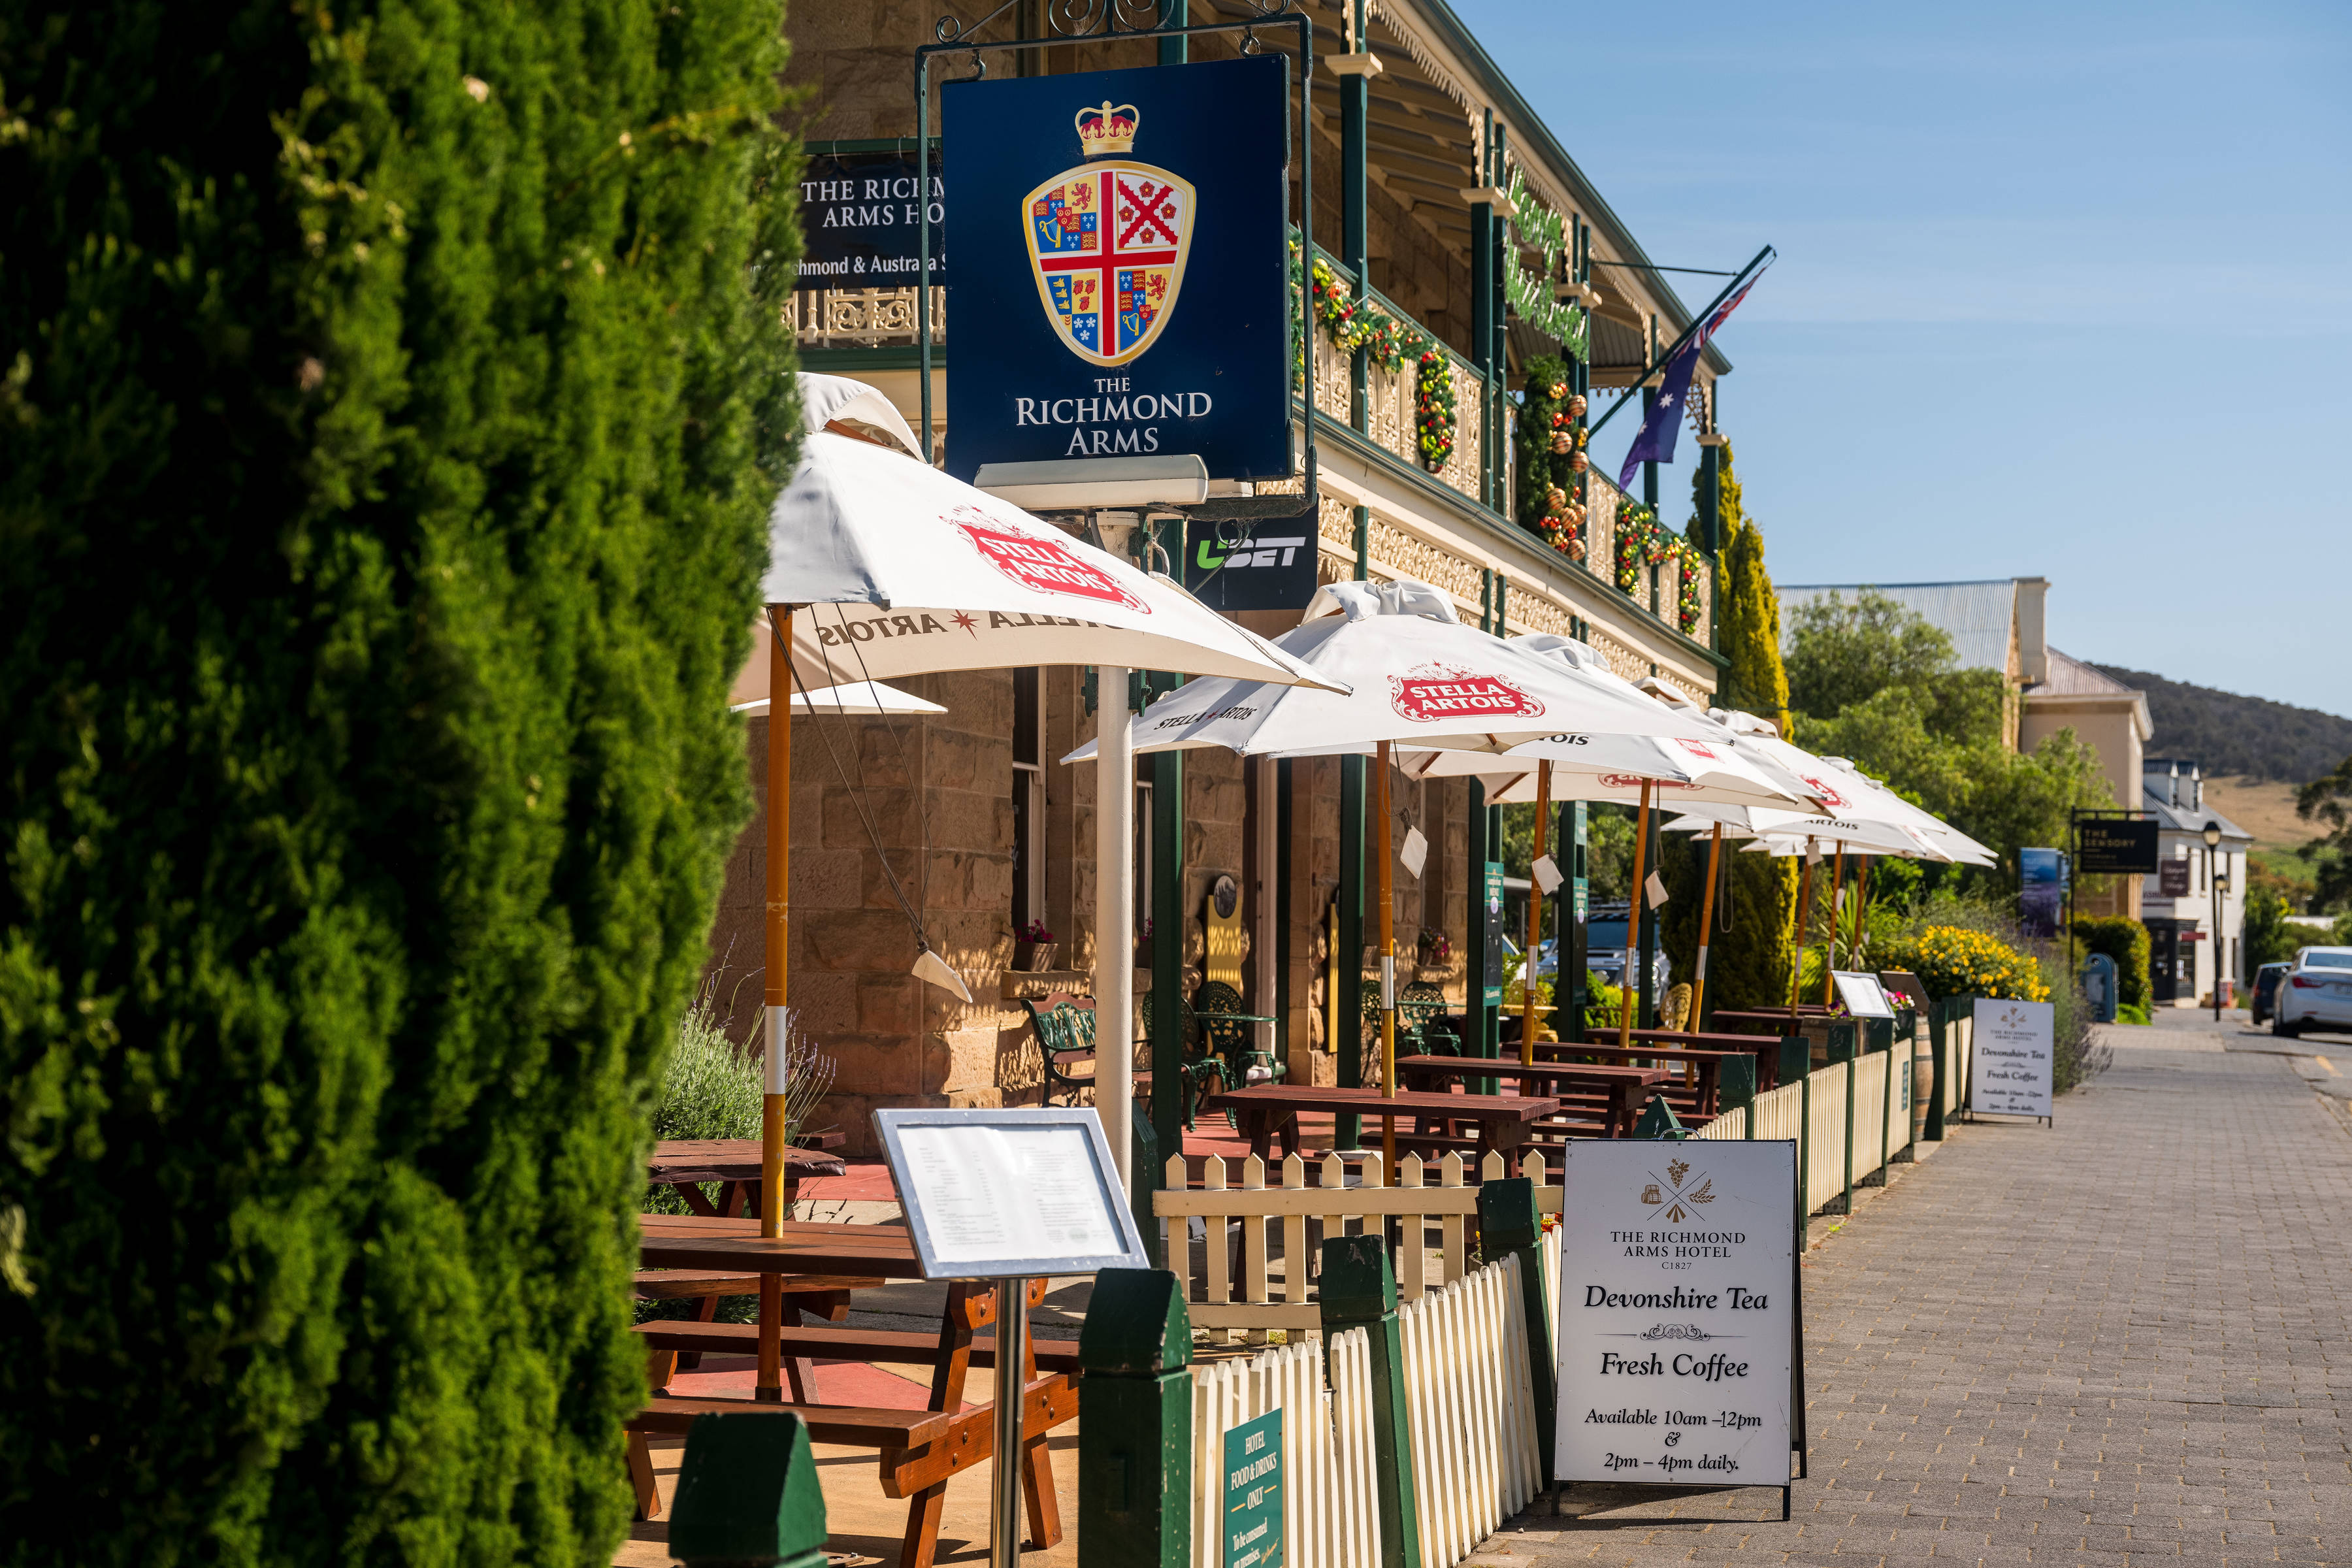 Outside view of the Richmond Arms Hotel facing Bridge Street, Richmond, showing outdoor seating and shade umbrellas on a sunny day.